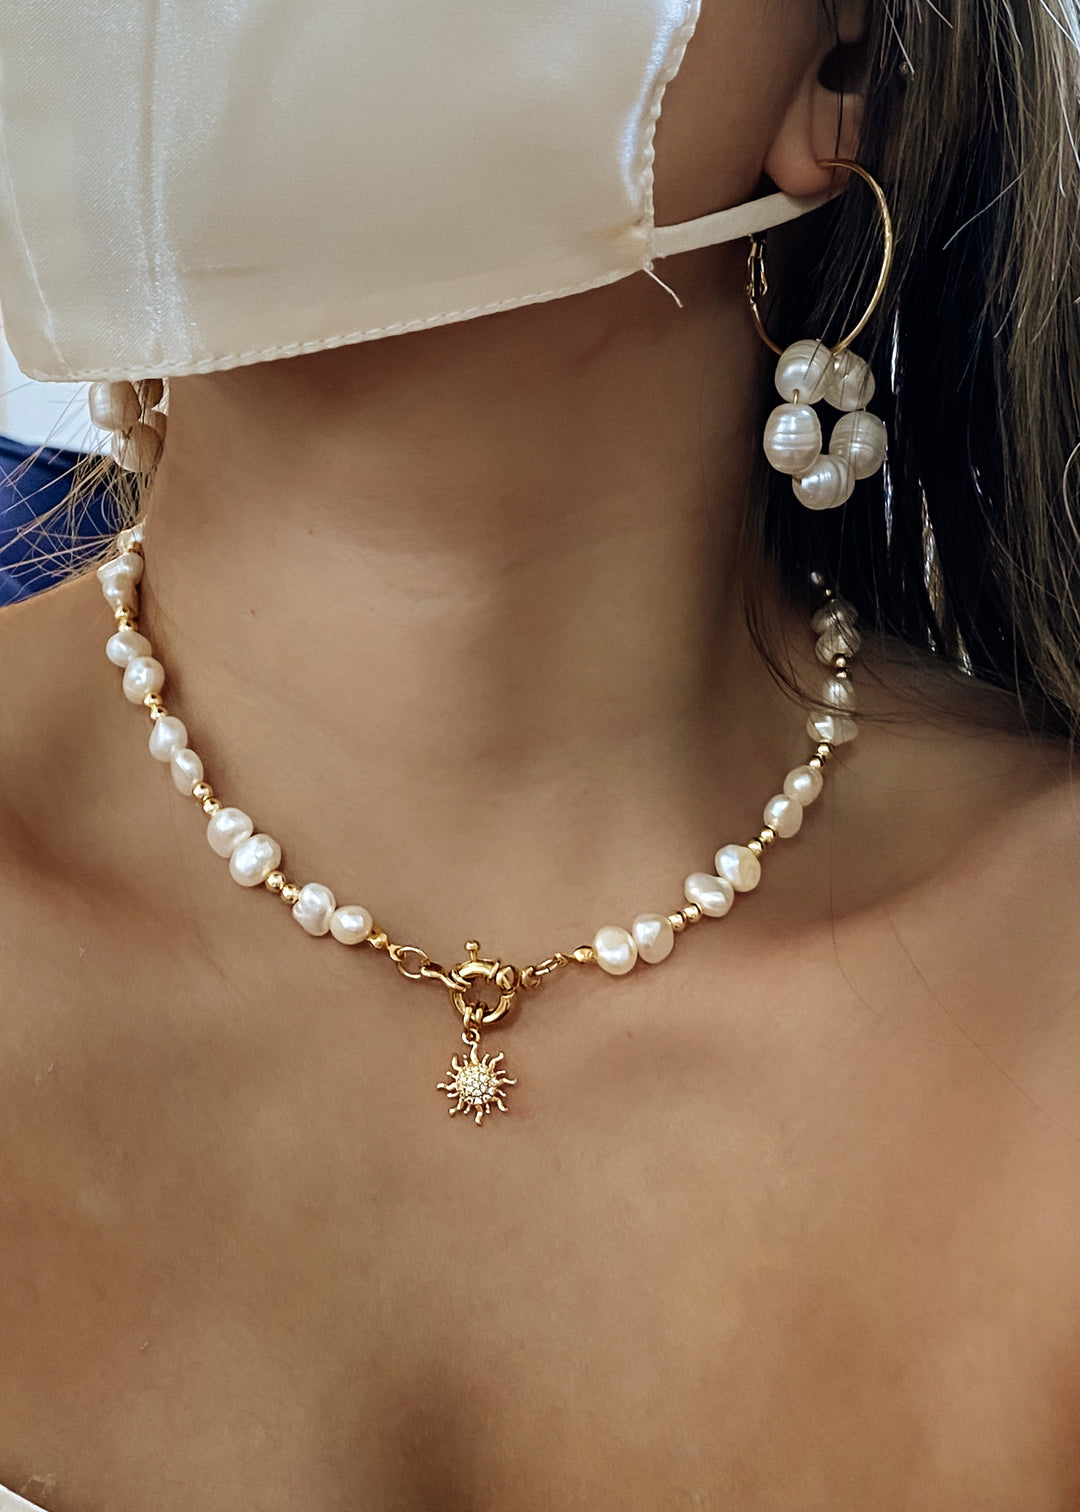 Sunny Pearl Necklace - Gold Filled